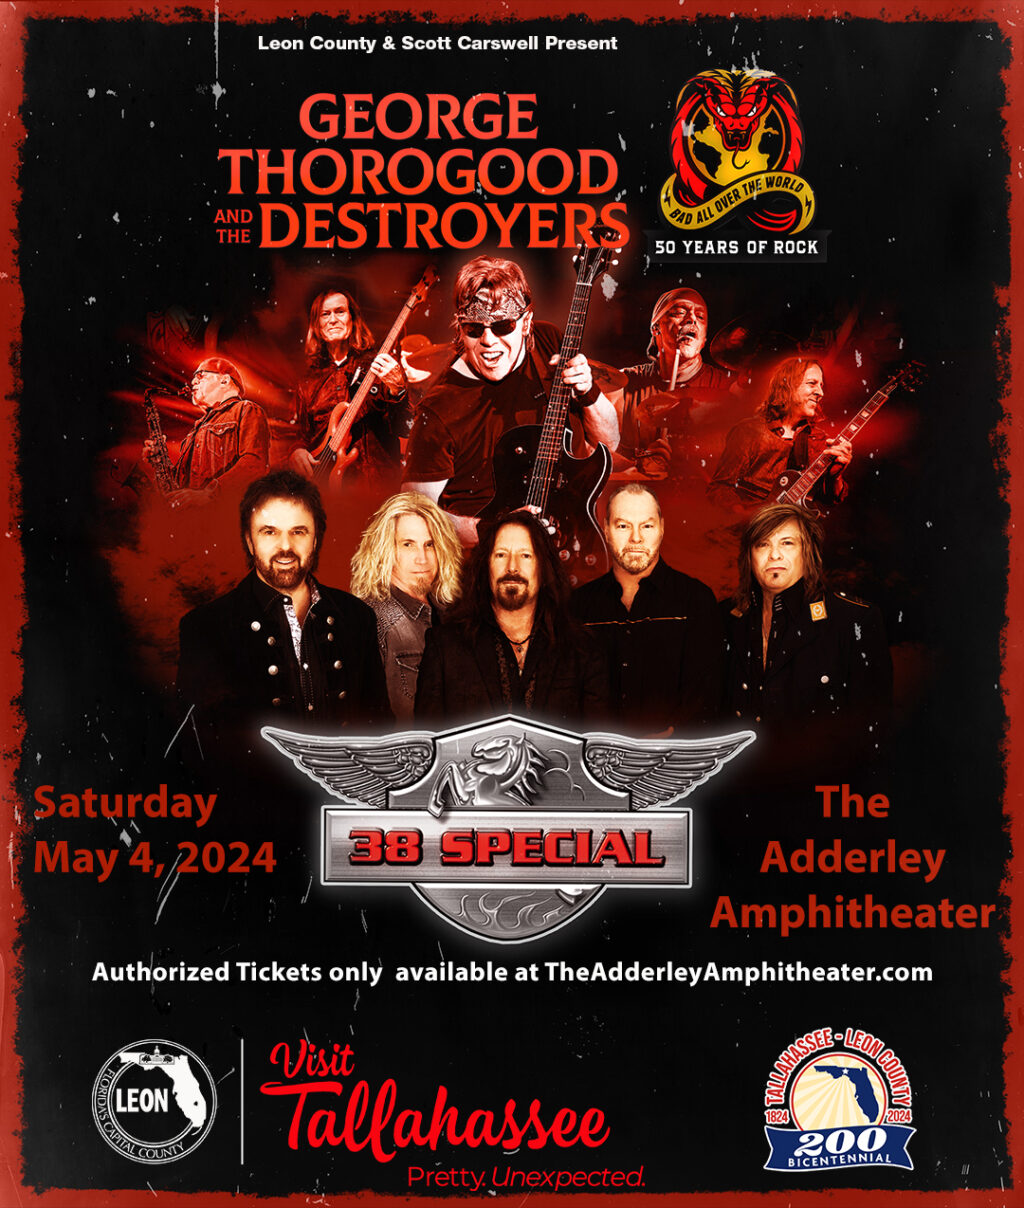 GEORGE THOROGOOD and THE DESTROYERS “Bad All Over The World– 50 Years of Rock”